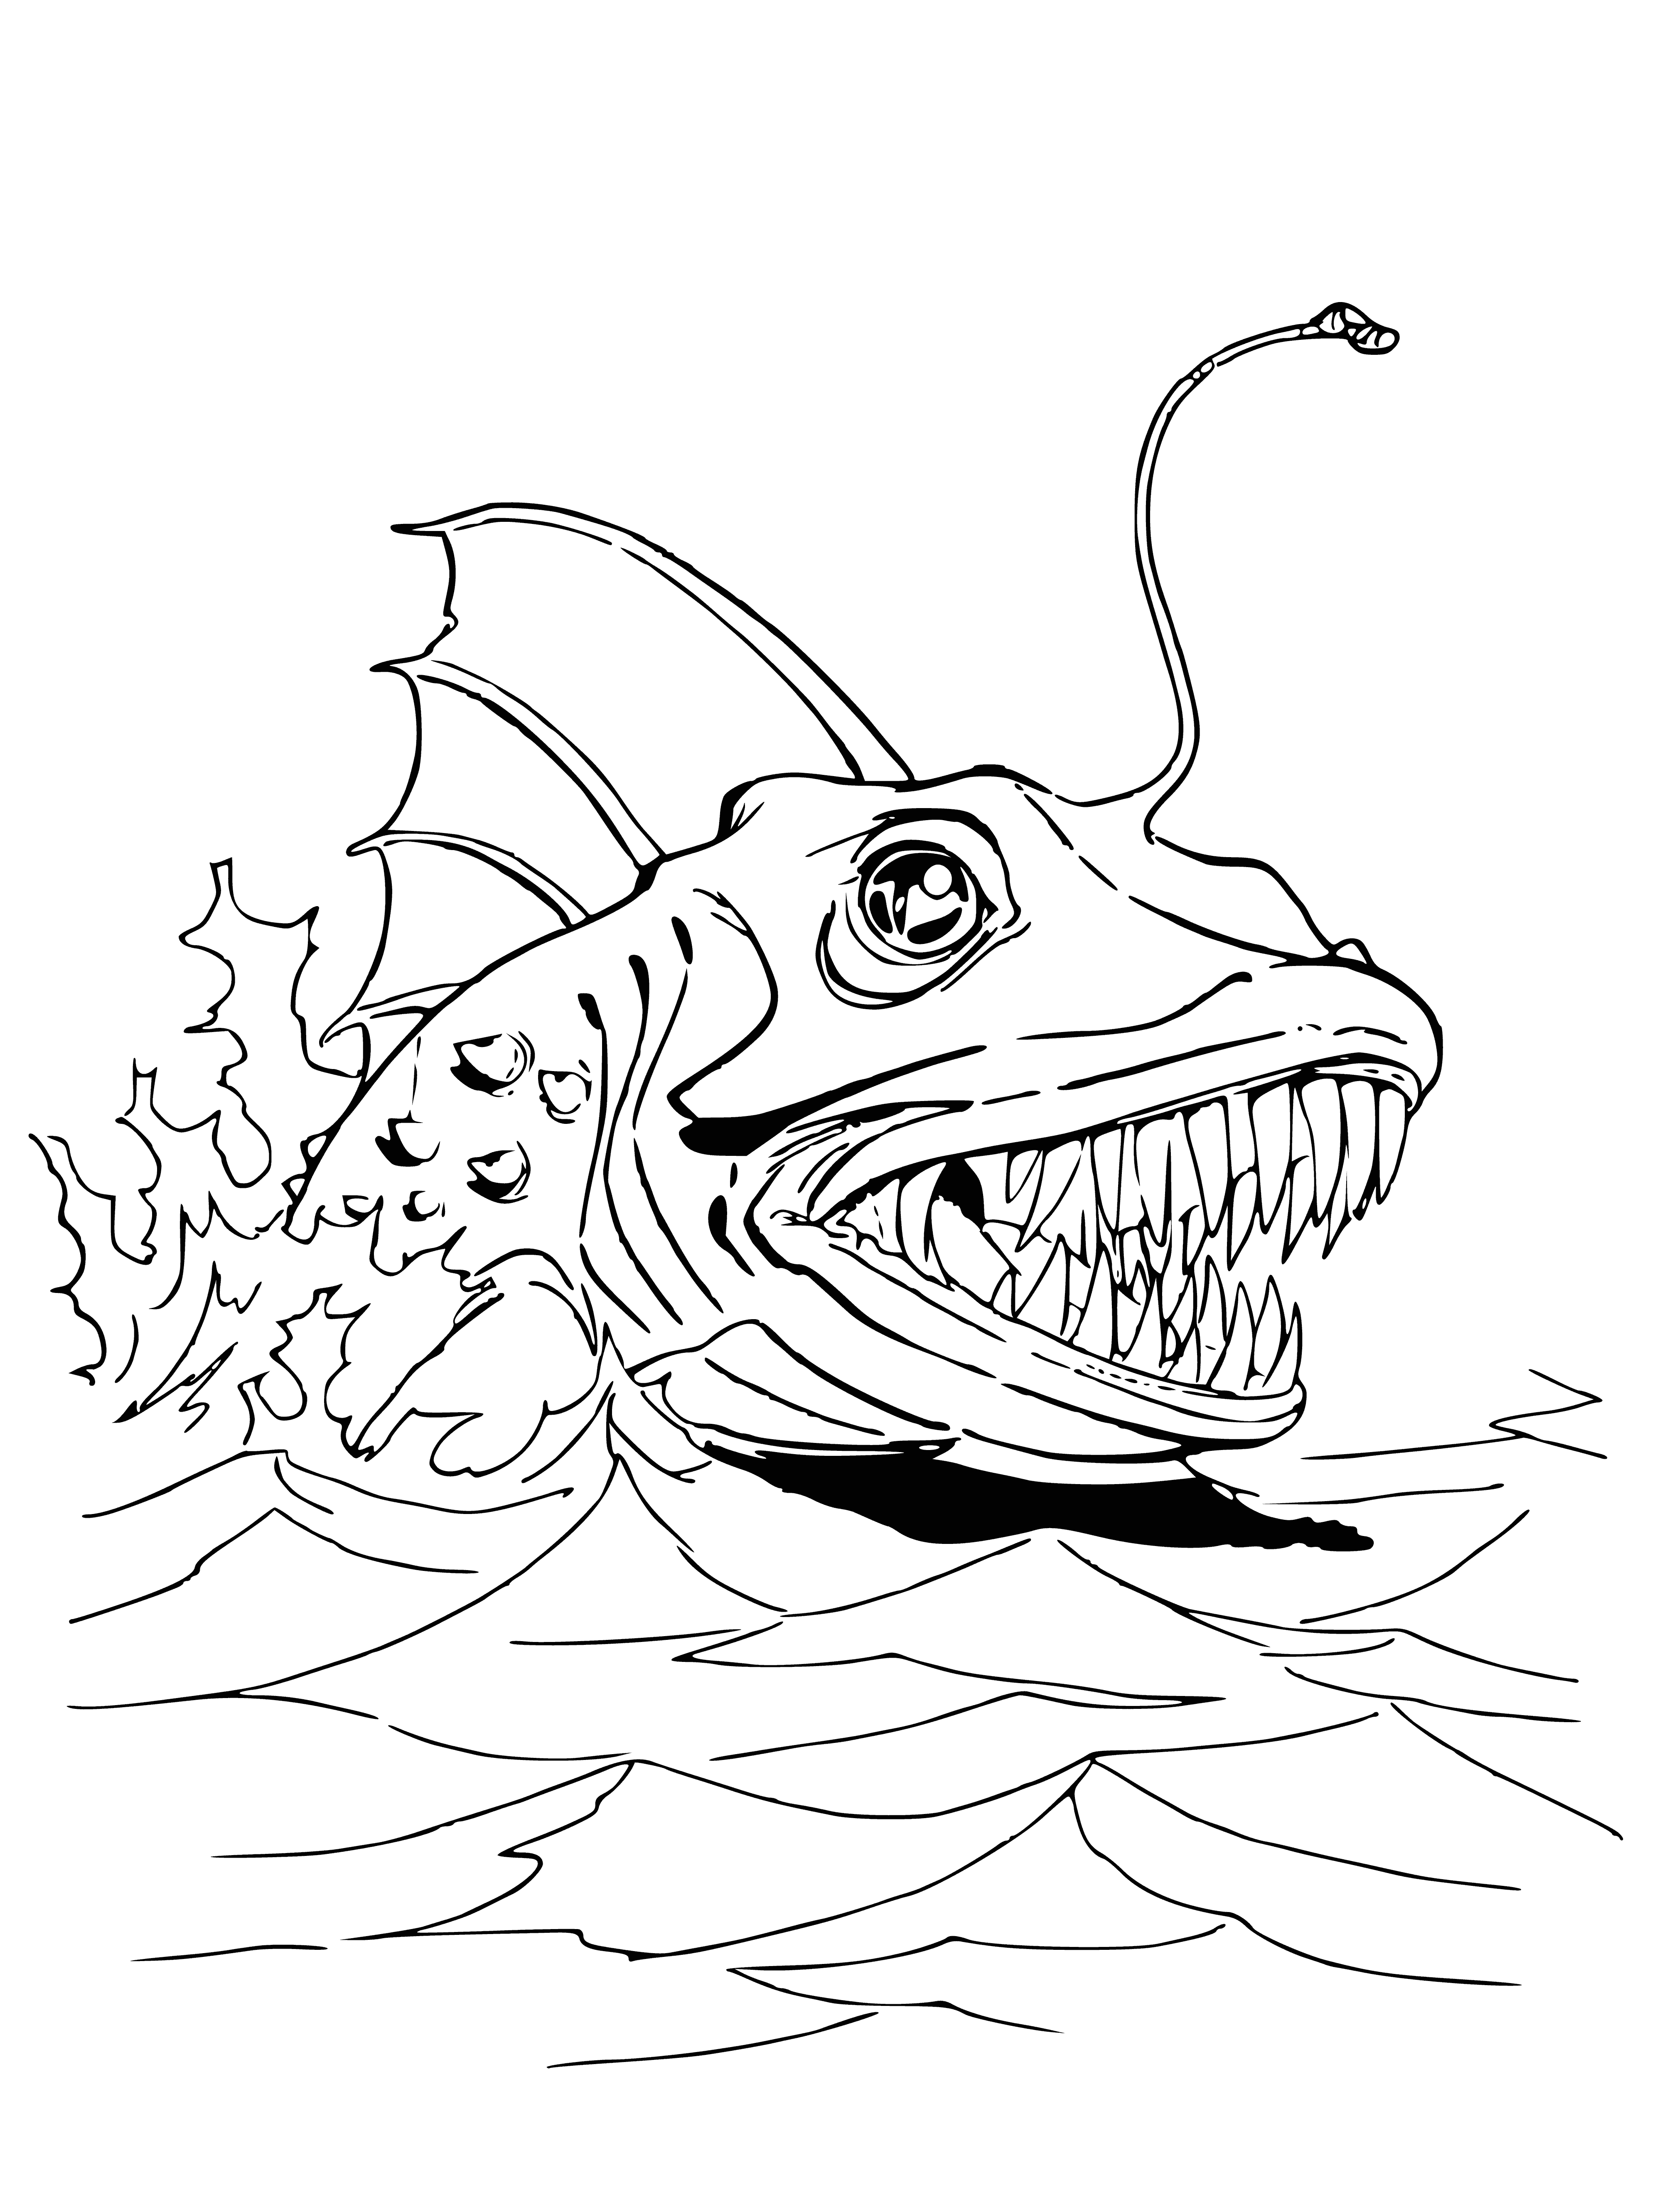 coloring page: Giant sea monster with tentacles, open maw, beady eyes & long body swims in a dark, murky ocean while smaller fish flee in terror.